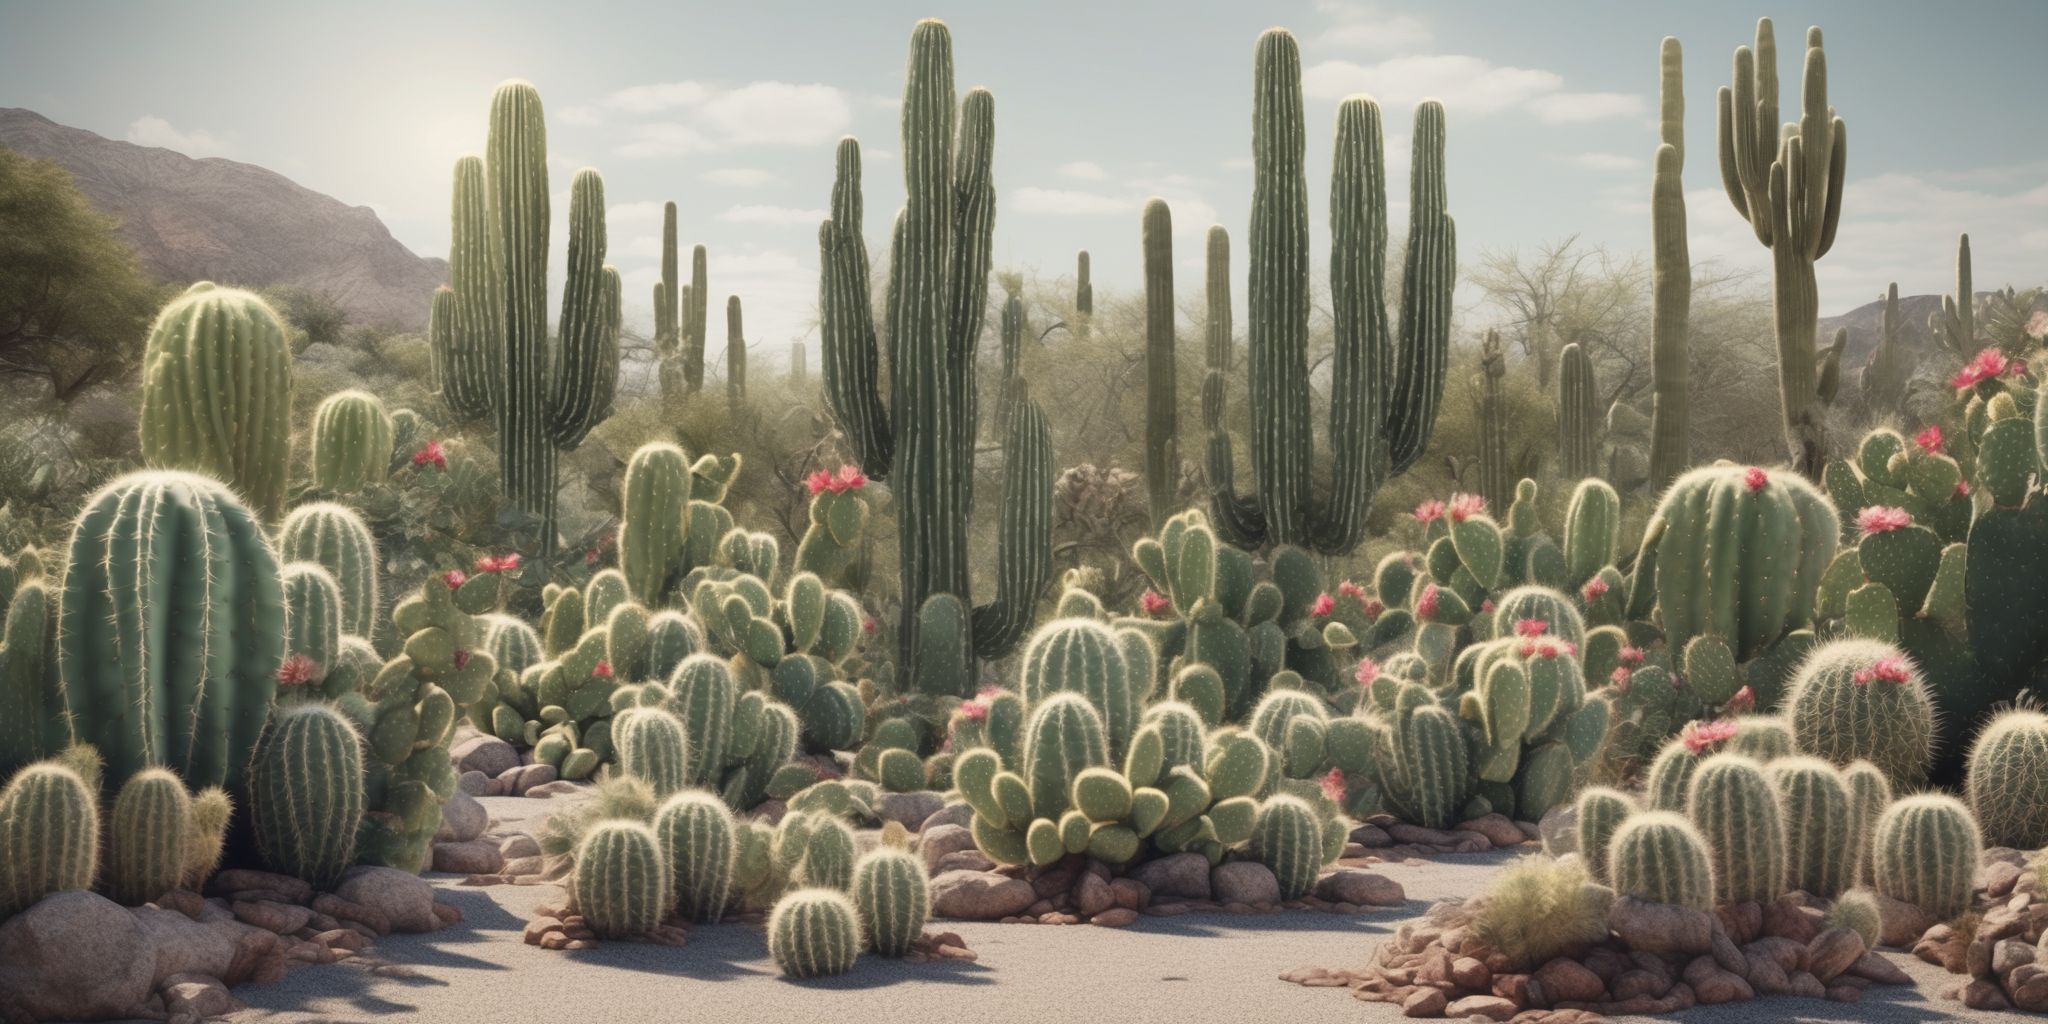 Cactus garden  in realistic, photographic style